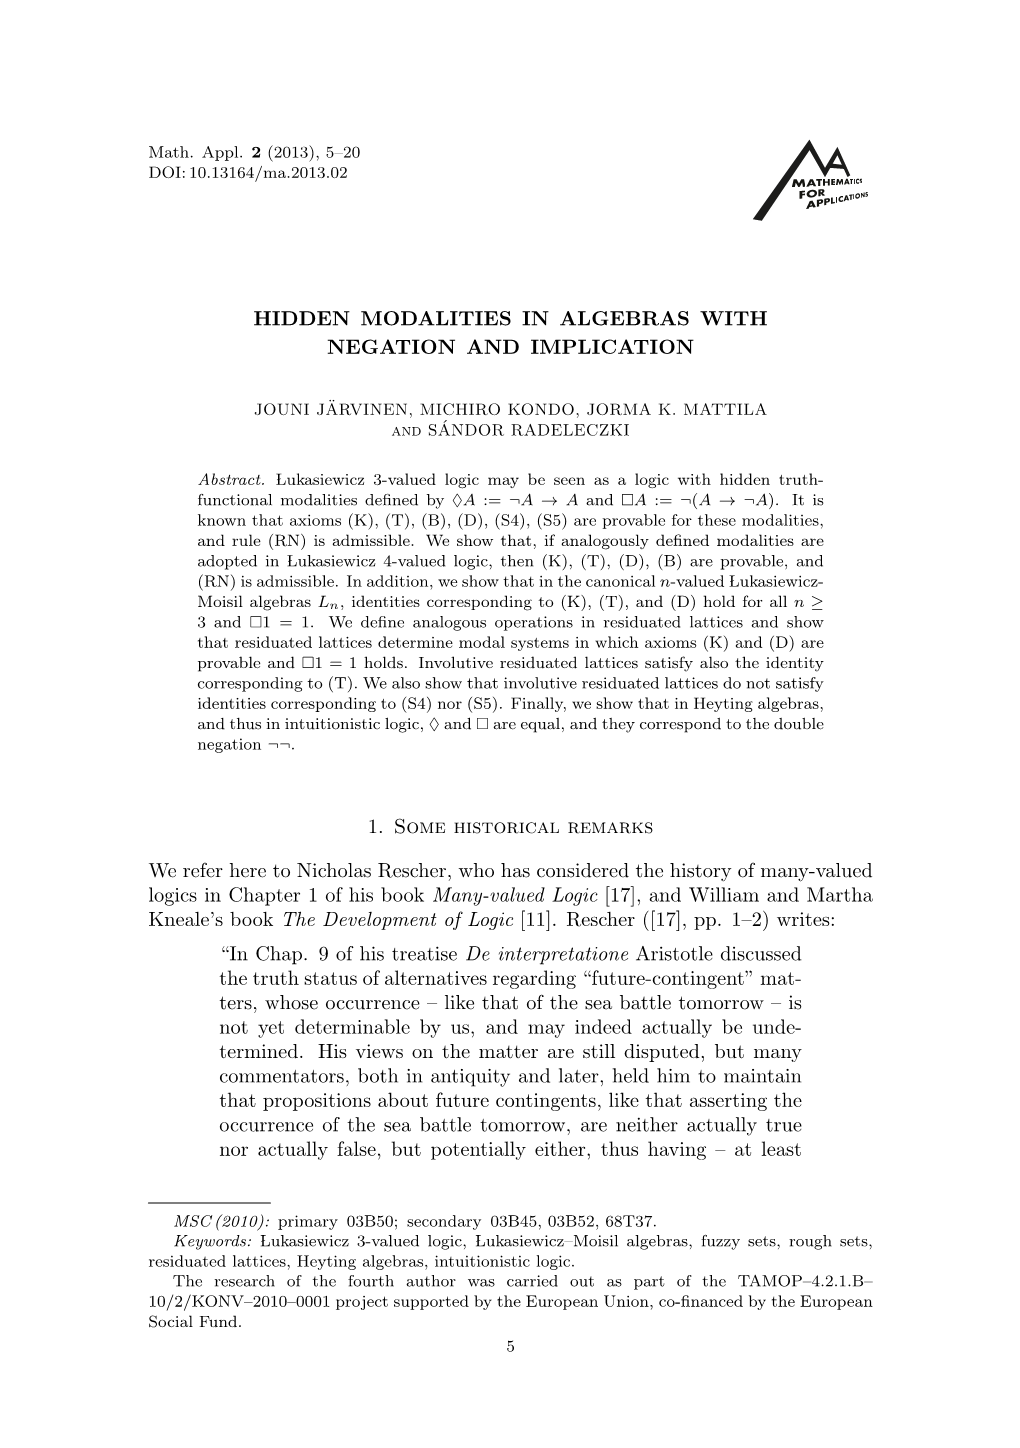 Hidden Modalities in Algebras with Negation and Implication